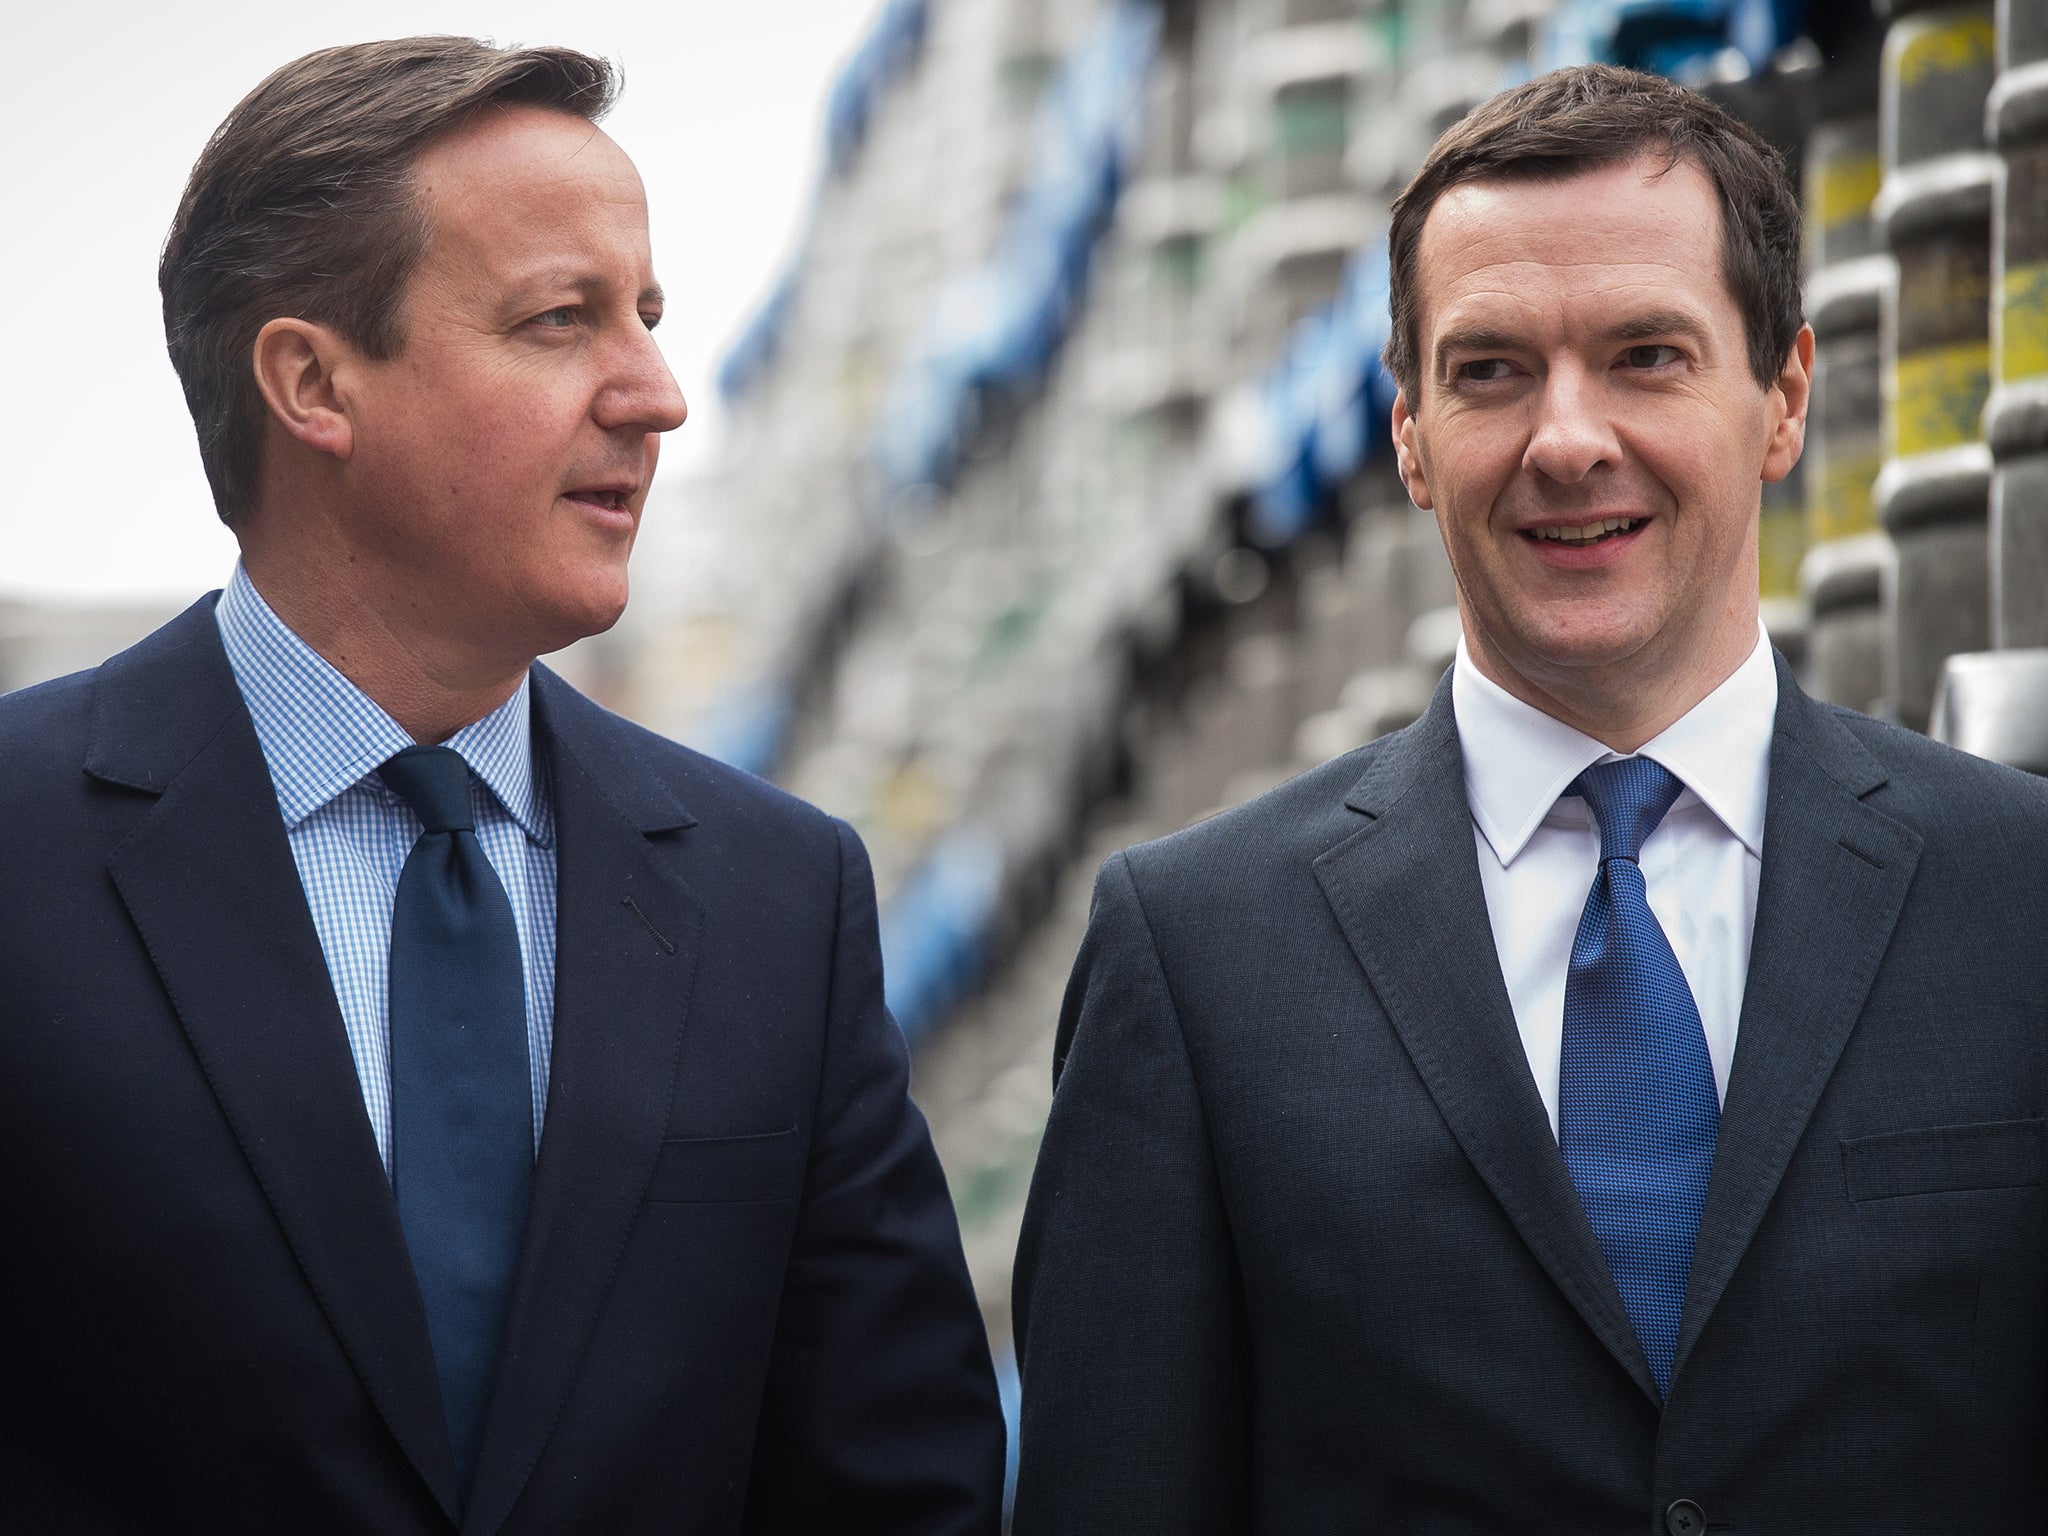 'Some of Osborne's comments in Shanghai left me uneasy'